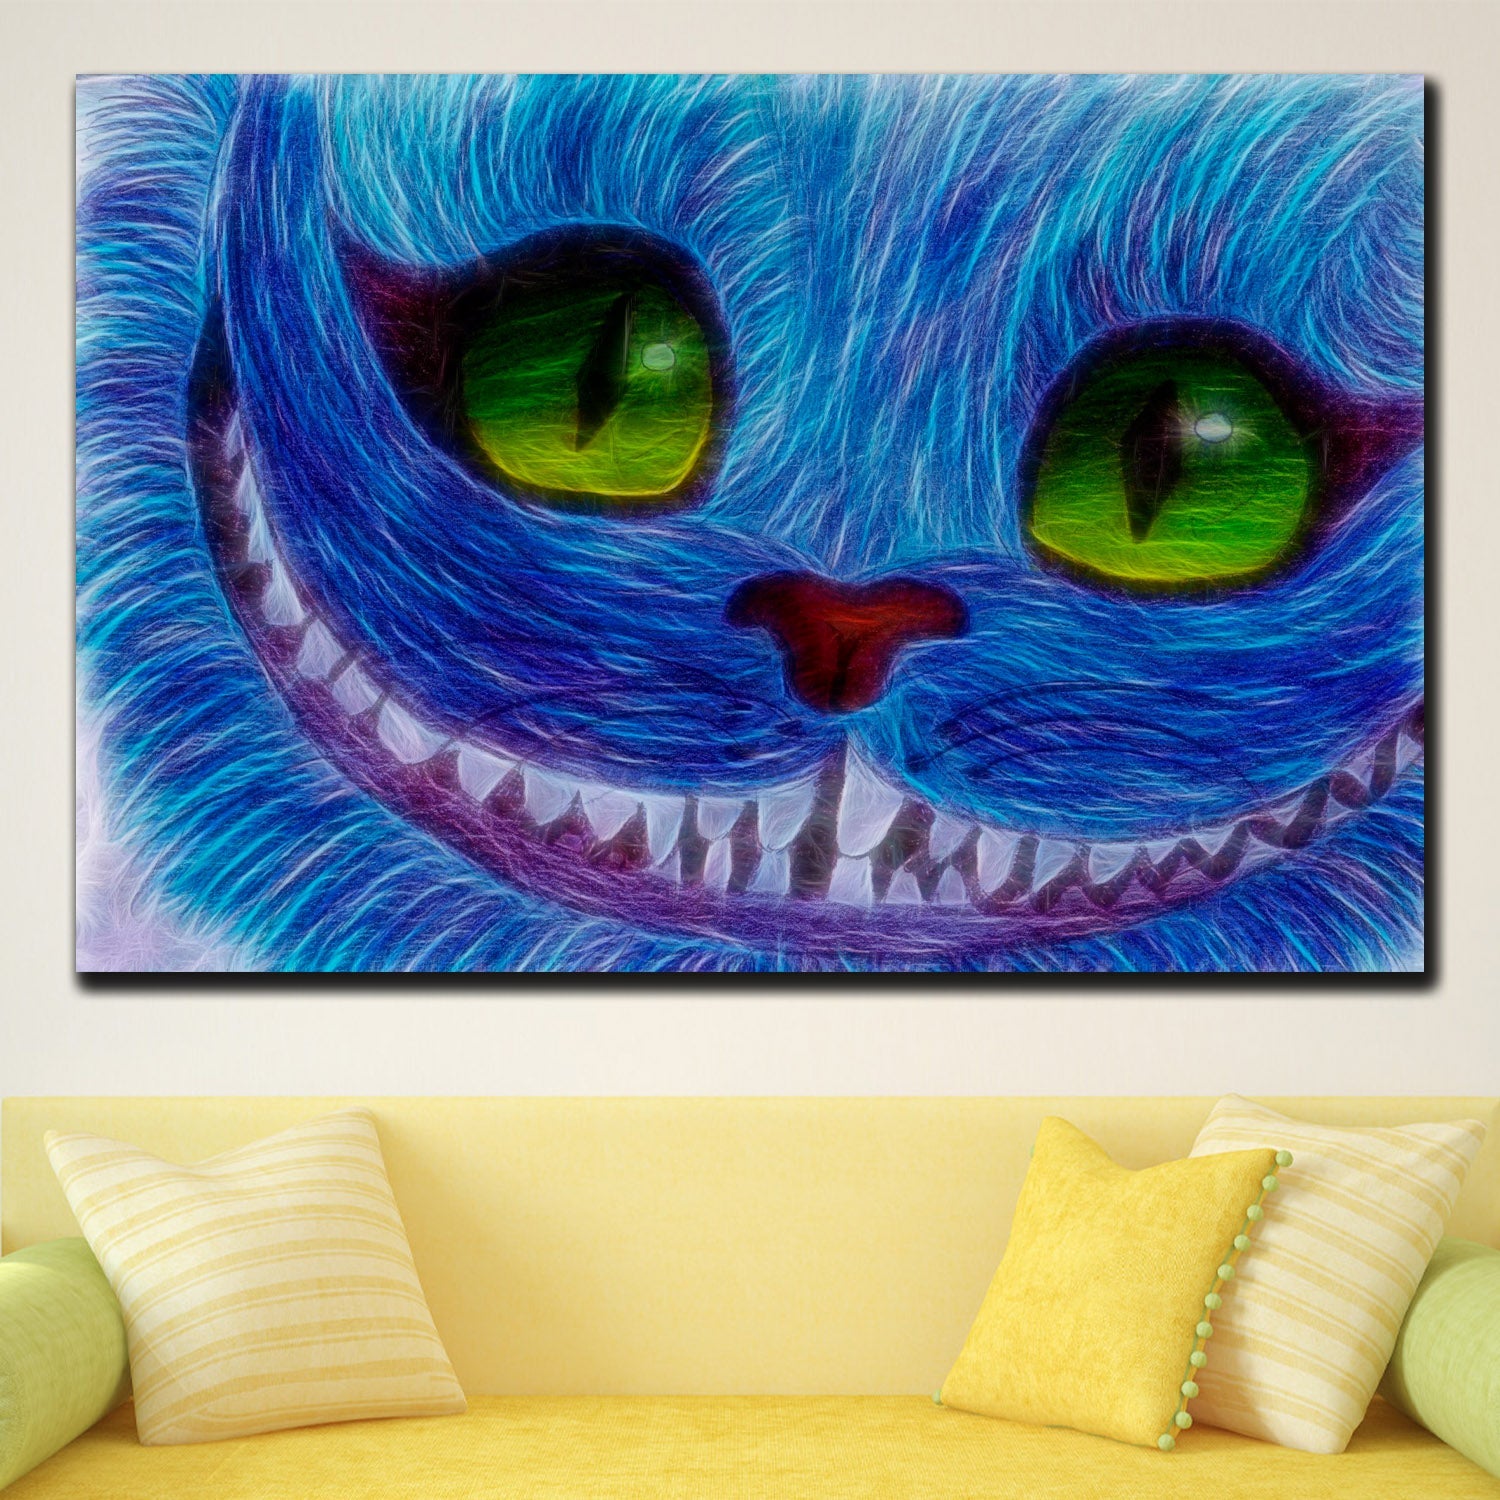 https://cdn.shopify.com/s/files/1/0387/9986/8044/products/TheCheshireCatCanvasArtprintStretched-3.jpg